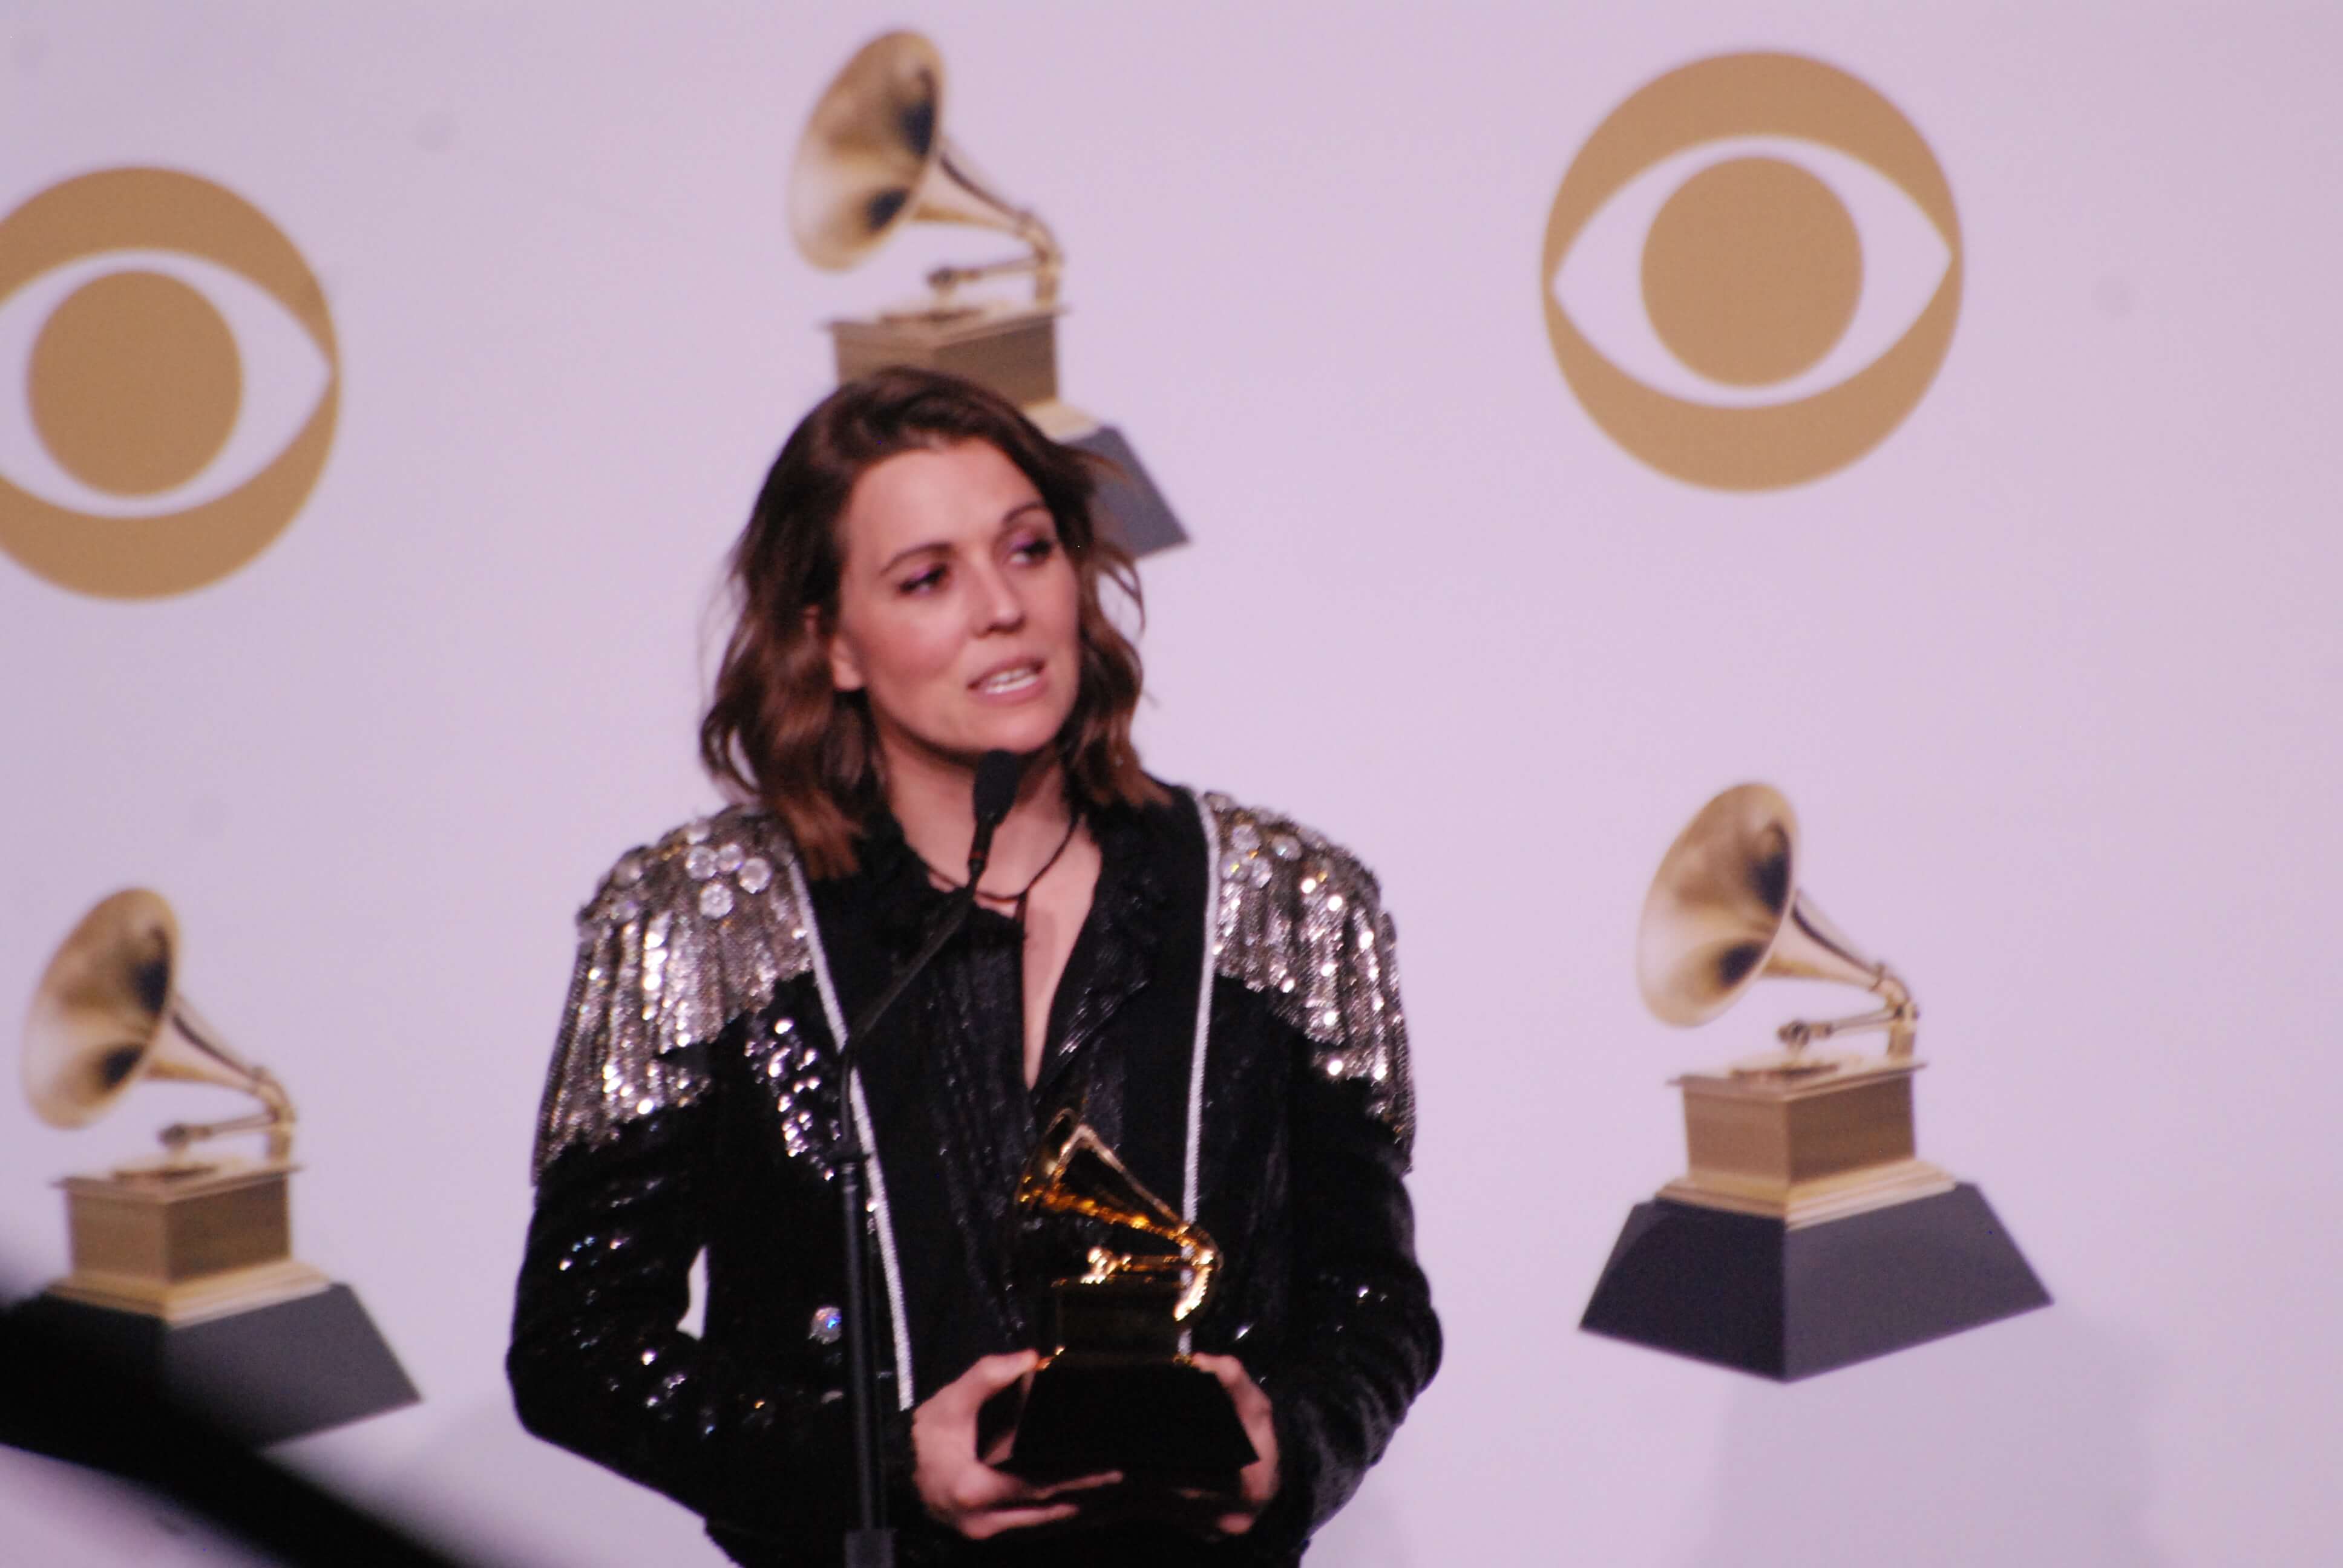 The 2019 Grammy Show Coverage